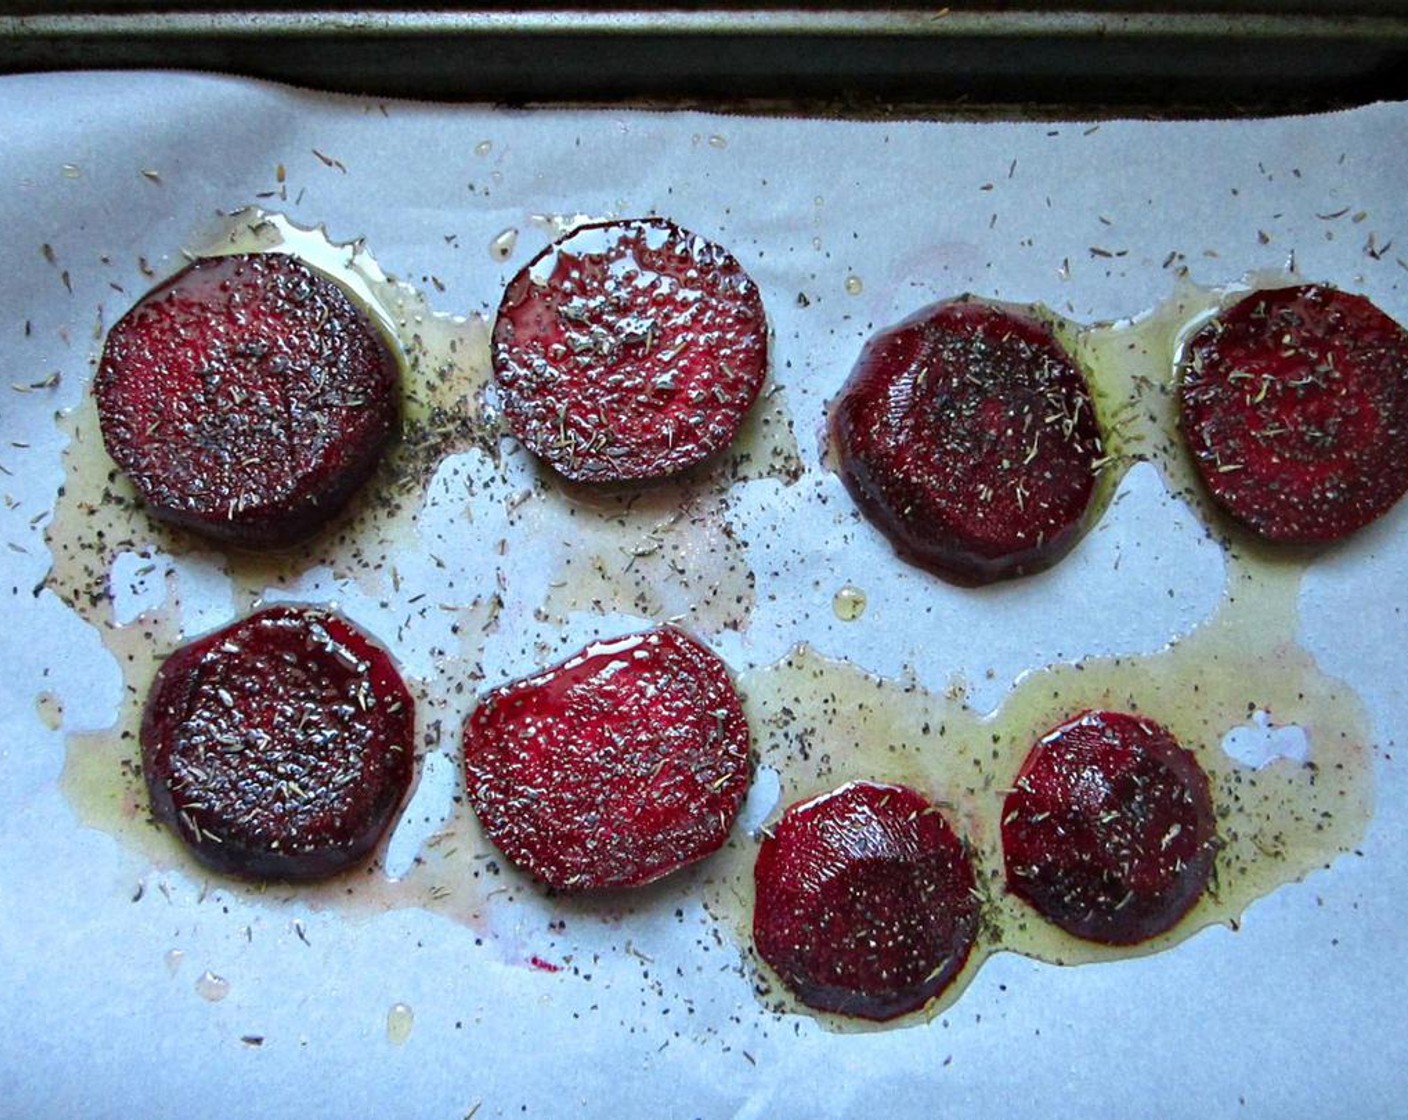 step 5 Bake the beets in the oven until fork tender, about 20 minutes.